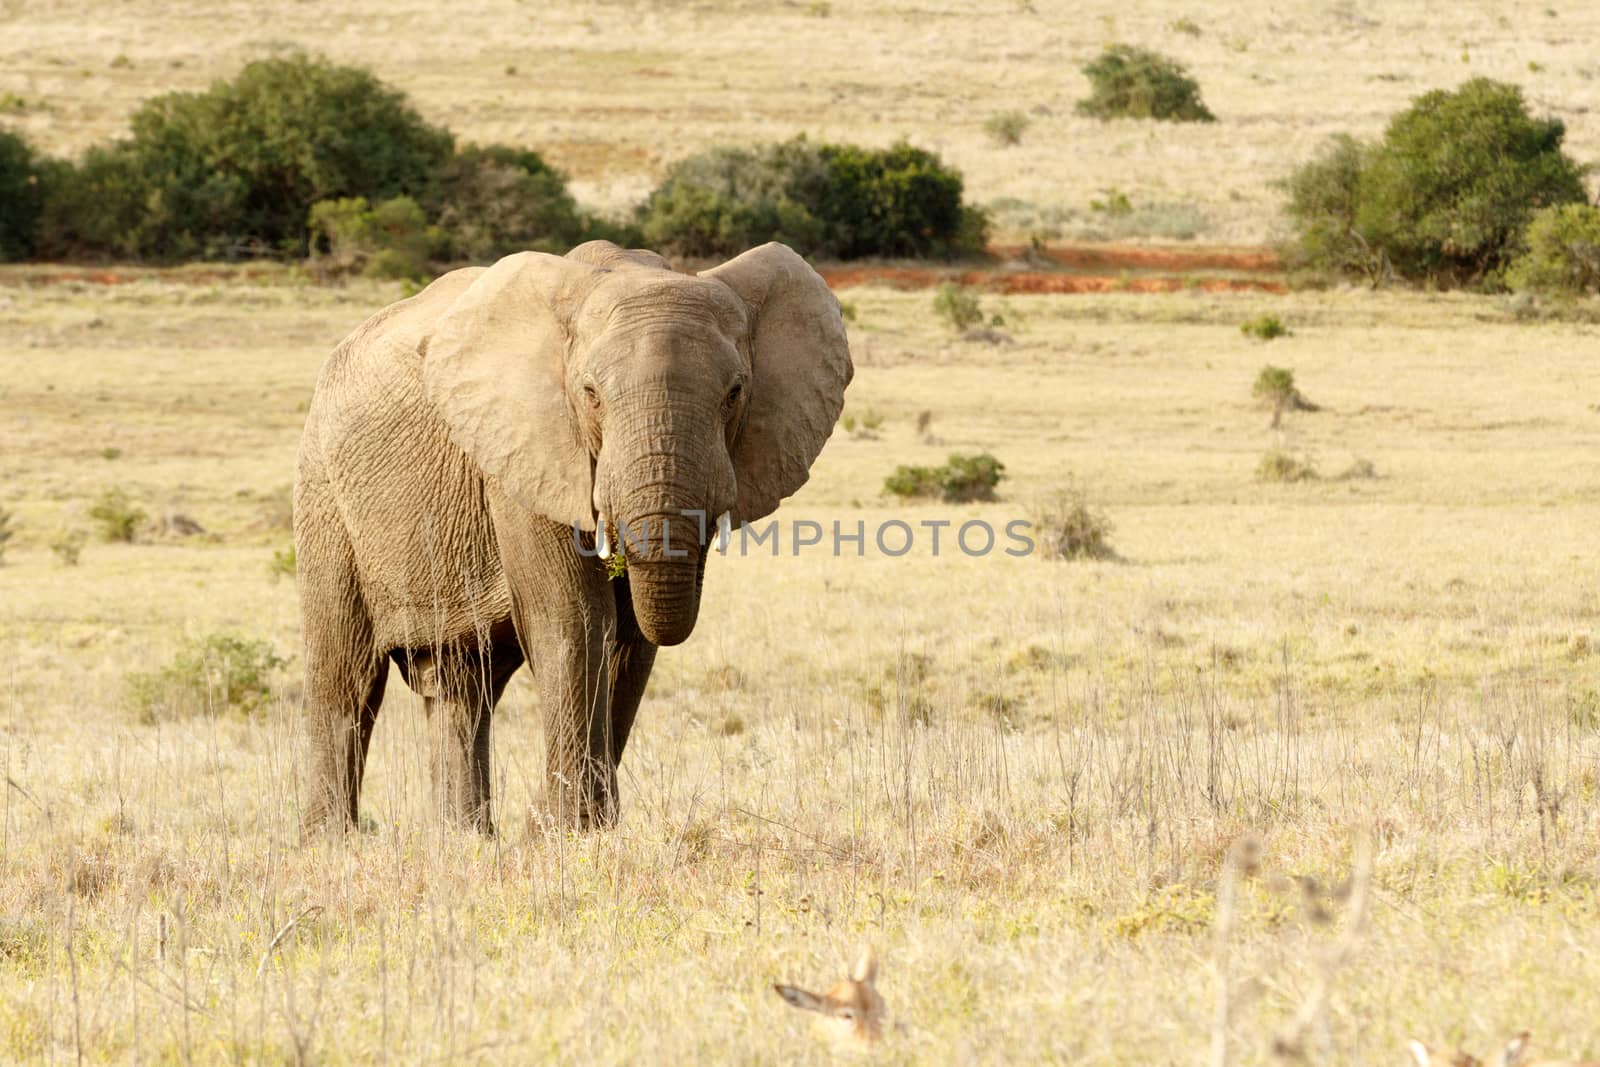 The African elephant standing and eating in a open yellow field.